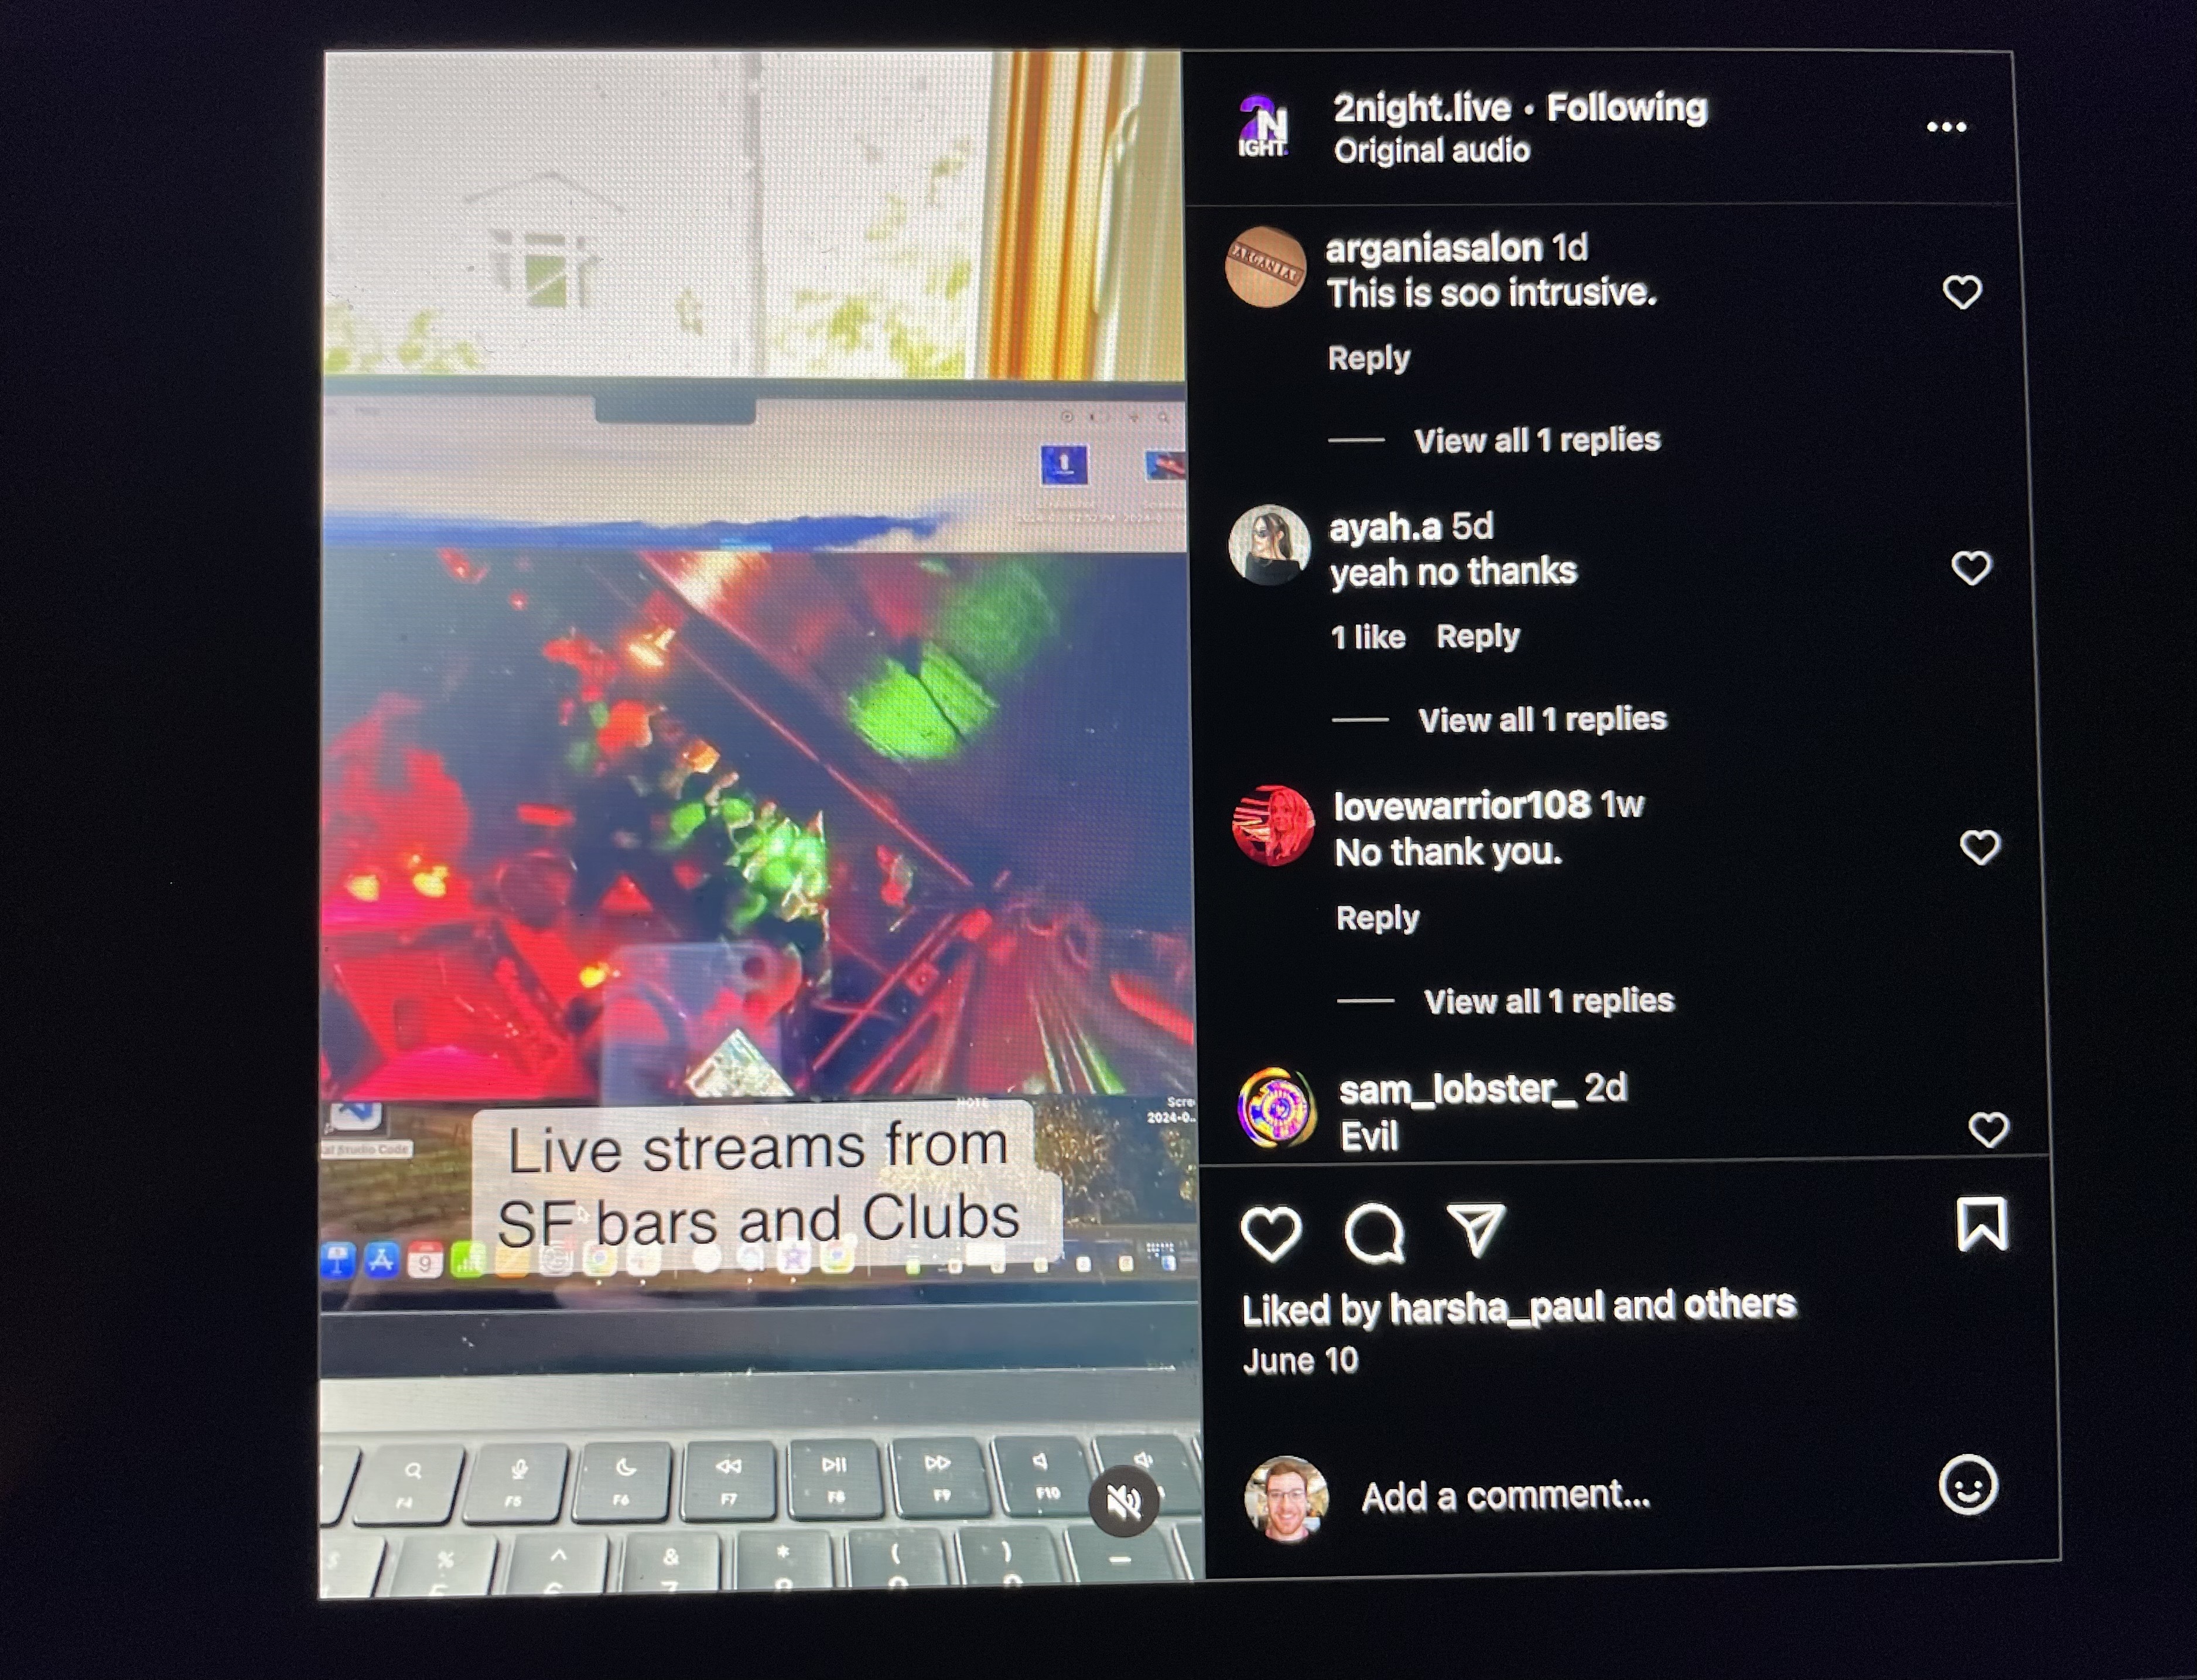 The image shows a computer screen streaming a video with colorful lights labeled &quot;Live streams from SF bars and Clubs.&quot; Comments on the right criticize the stream.